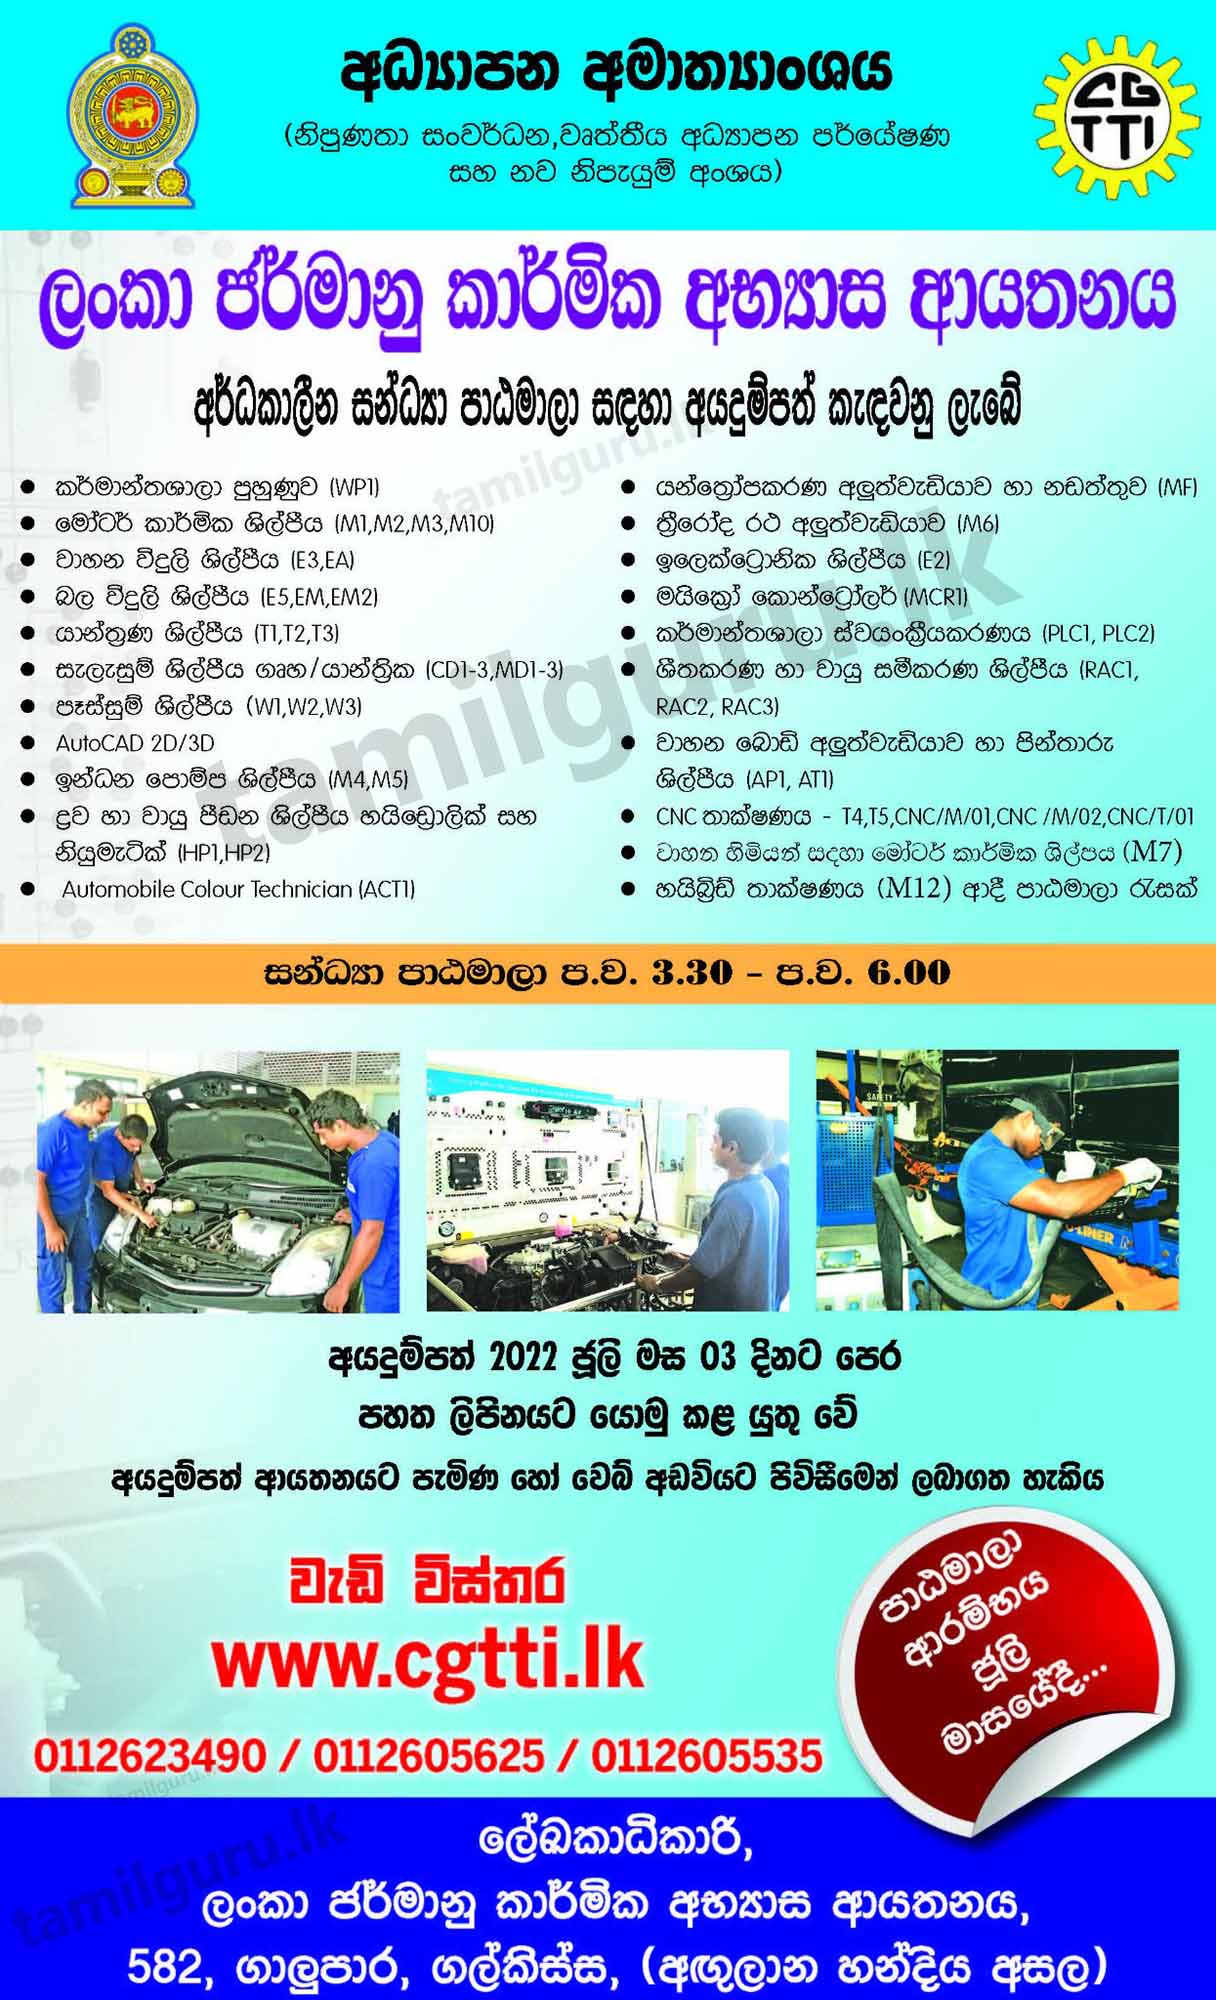 Calling Applications for Short Term Part-Time (Evening) Courses (2022 July Intake) Conducted by Ceylon German Technical Training Institute (CGTTI)